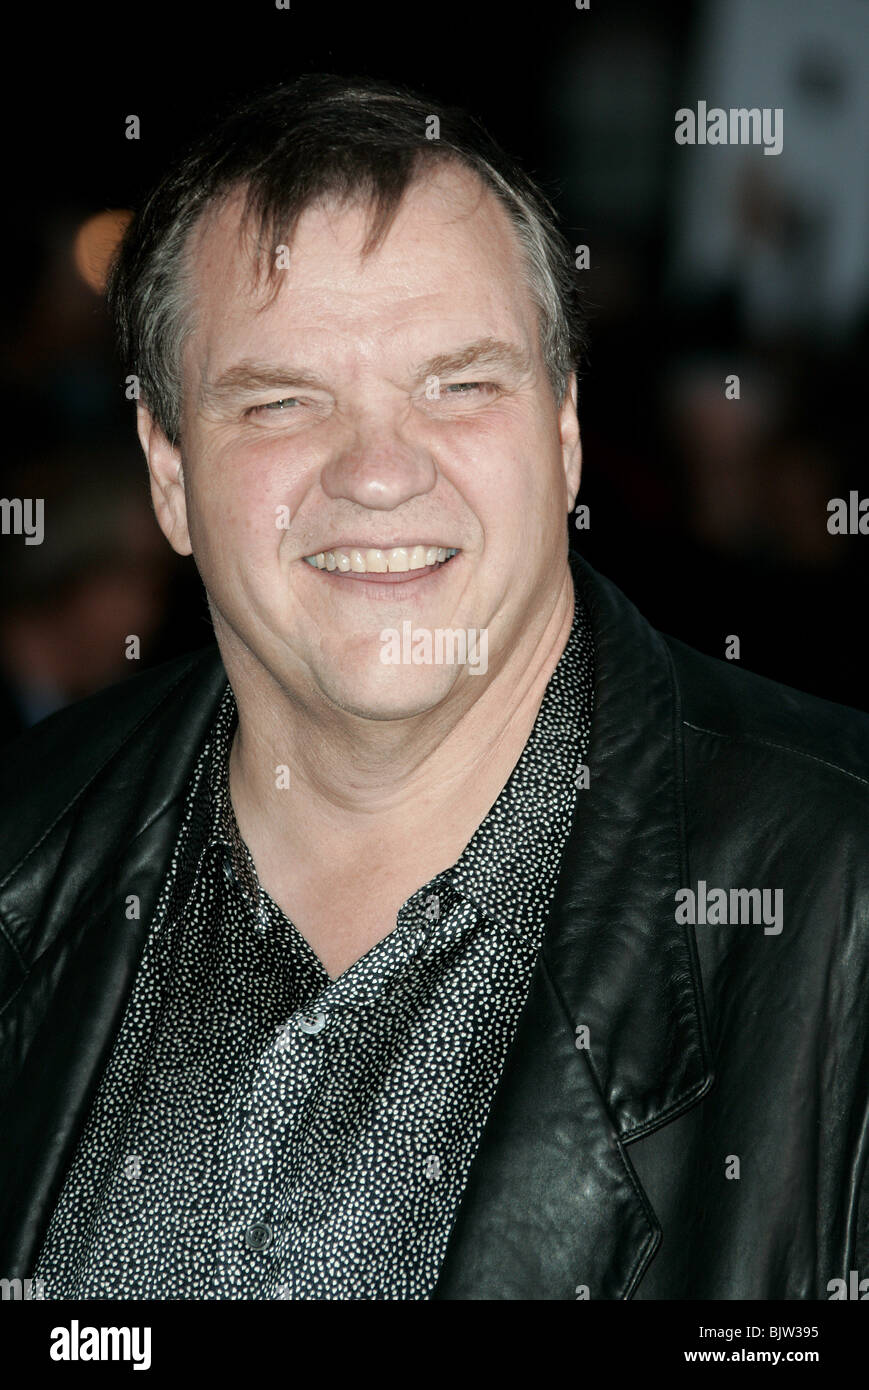 MEATLOAF COLLATERAL WORLD FILM PREMIER ORPHEUM THEATRE LOS ANGELES USA 02 August 2004 Stock Photo